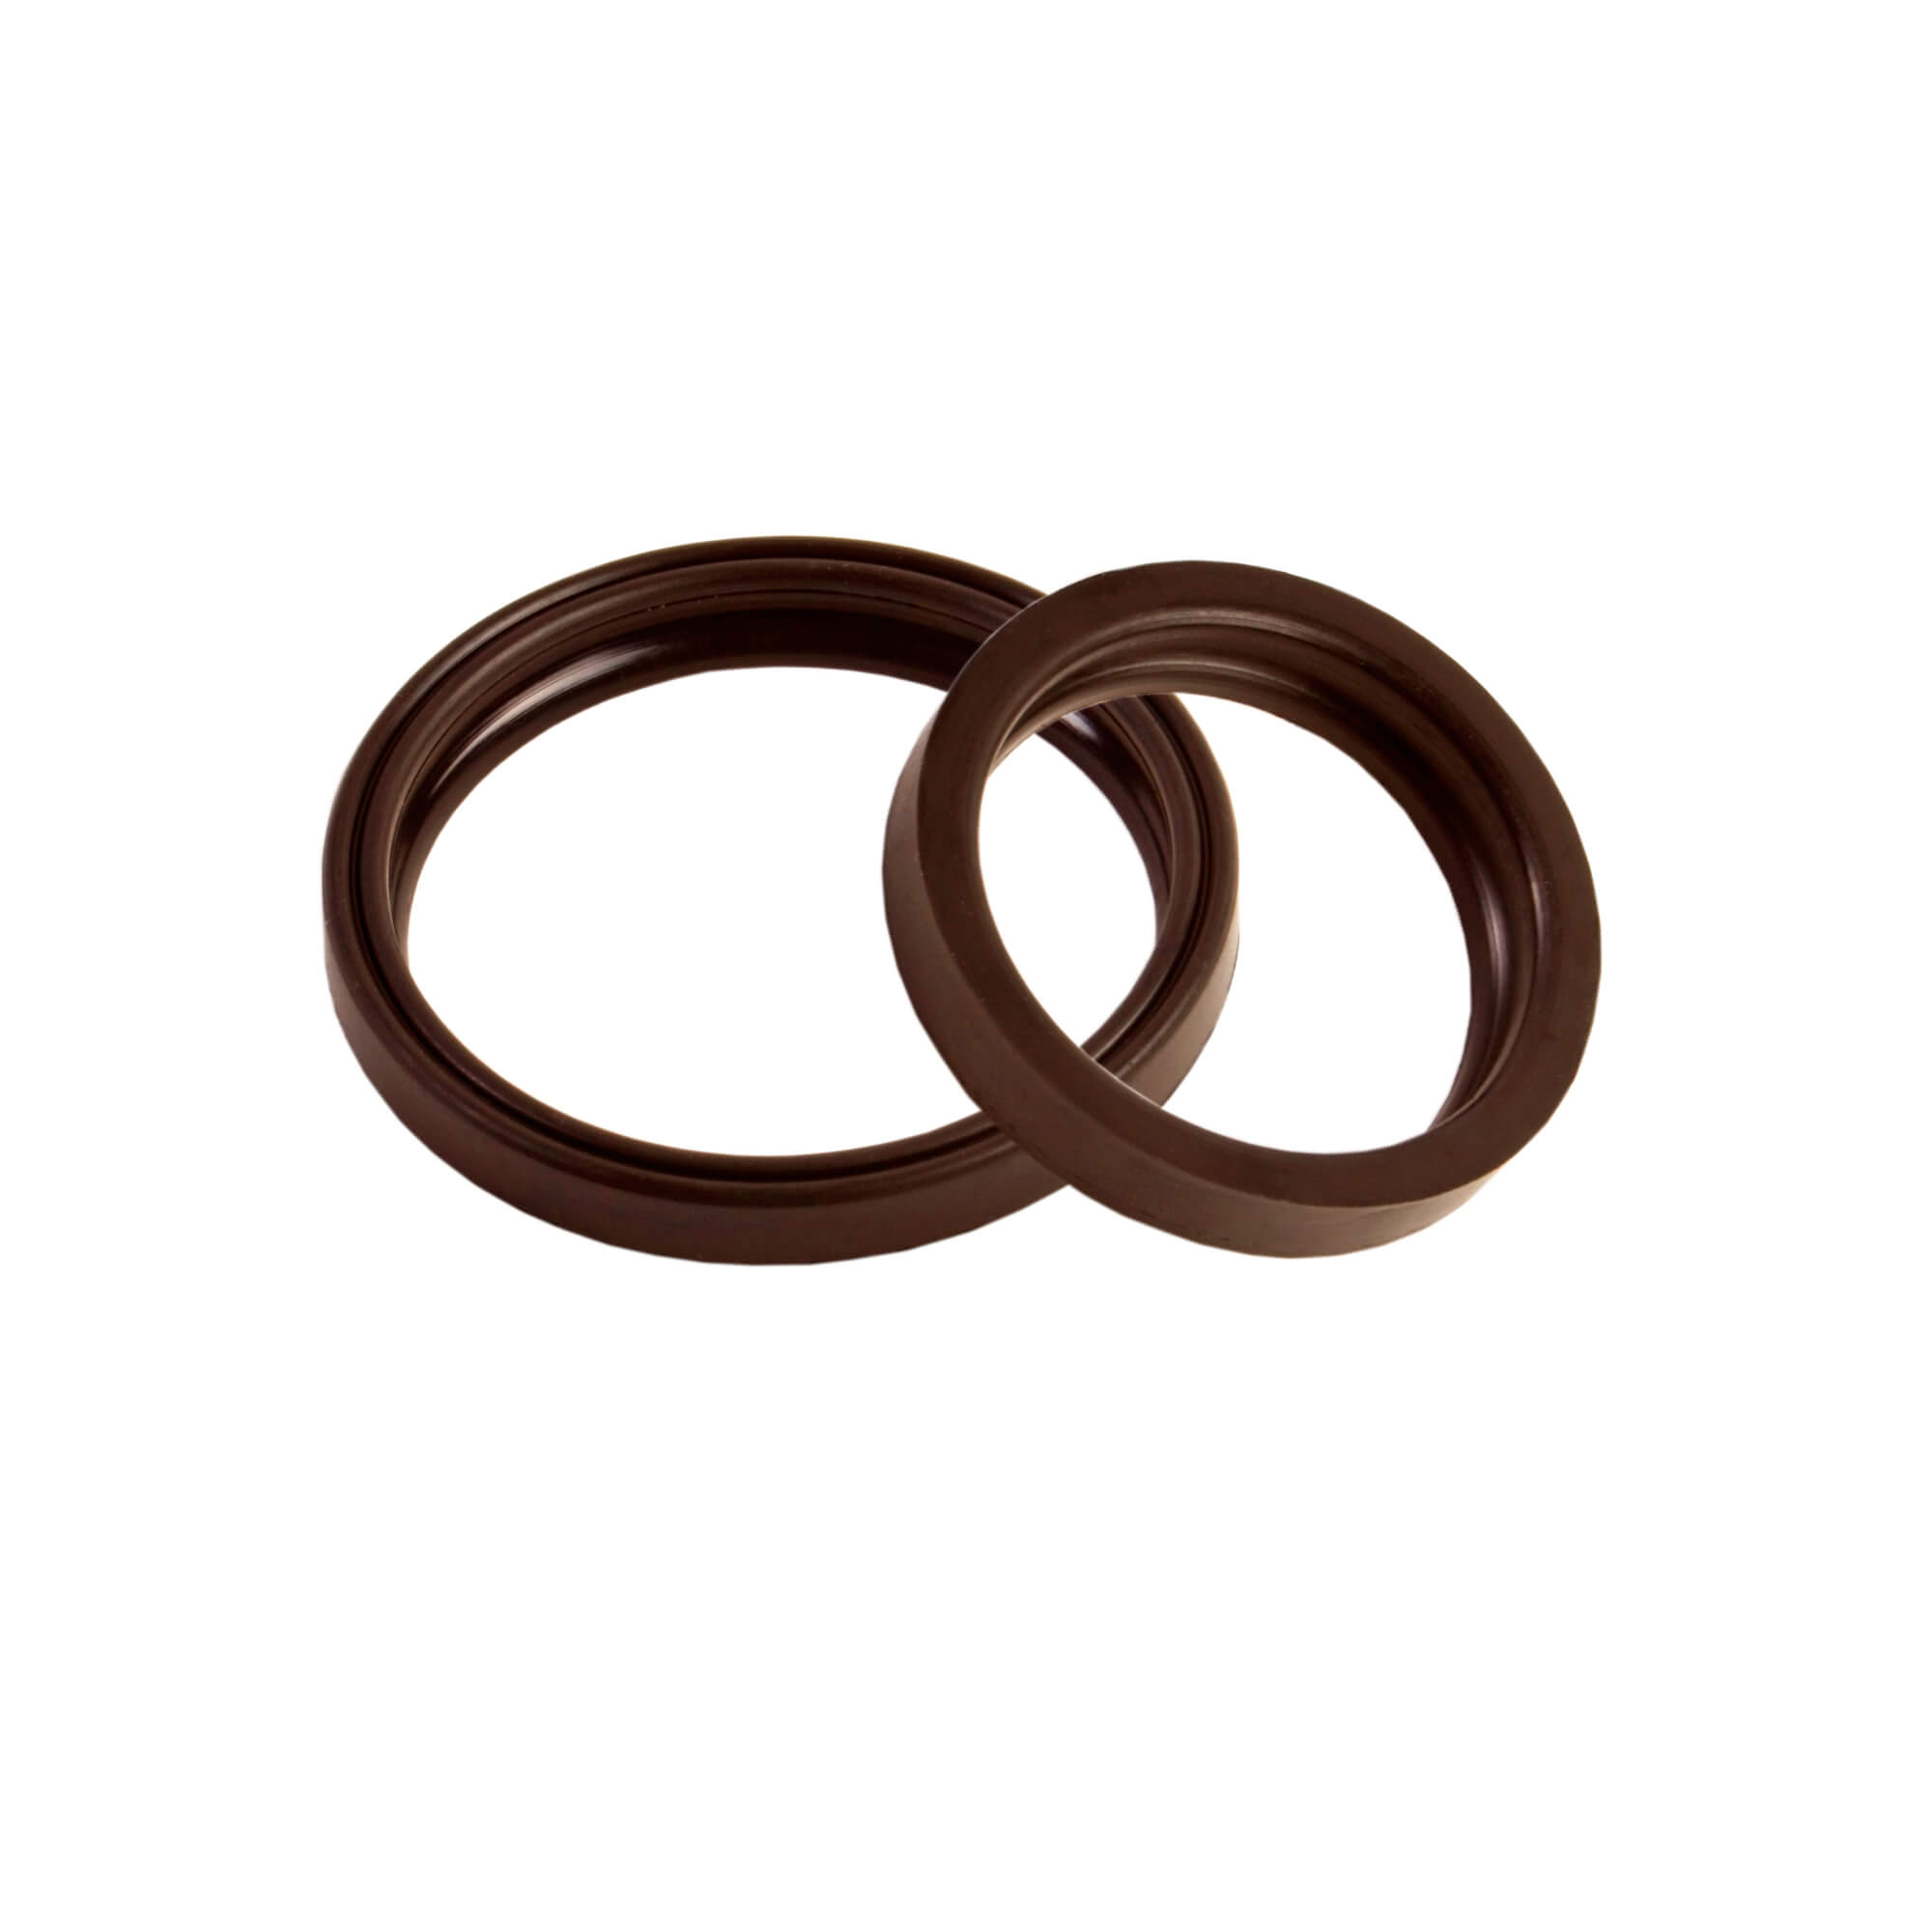 Storz Pressure Gaskets for Fire Pressure Couplings and Hoses